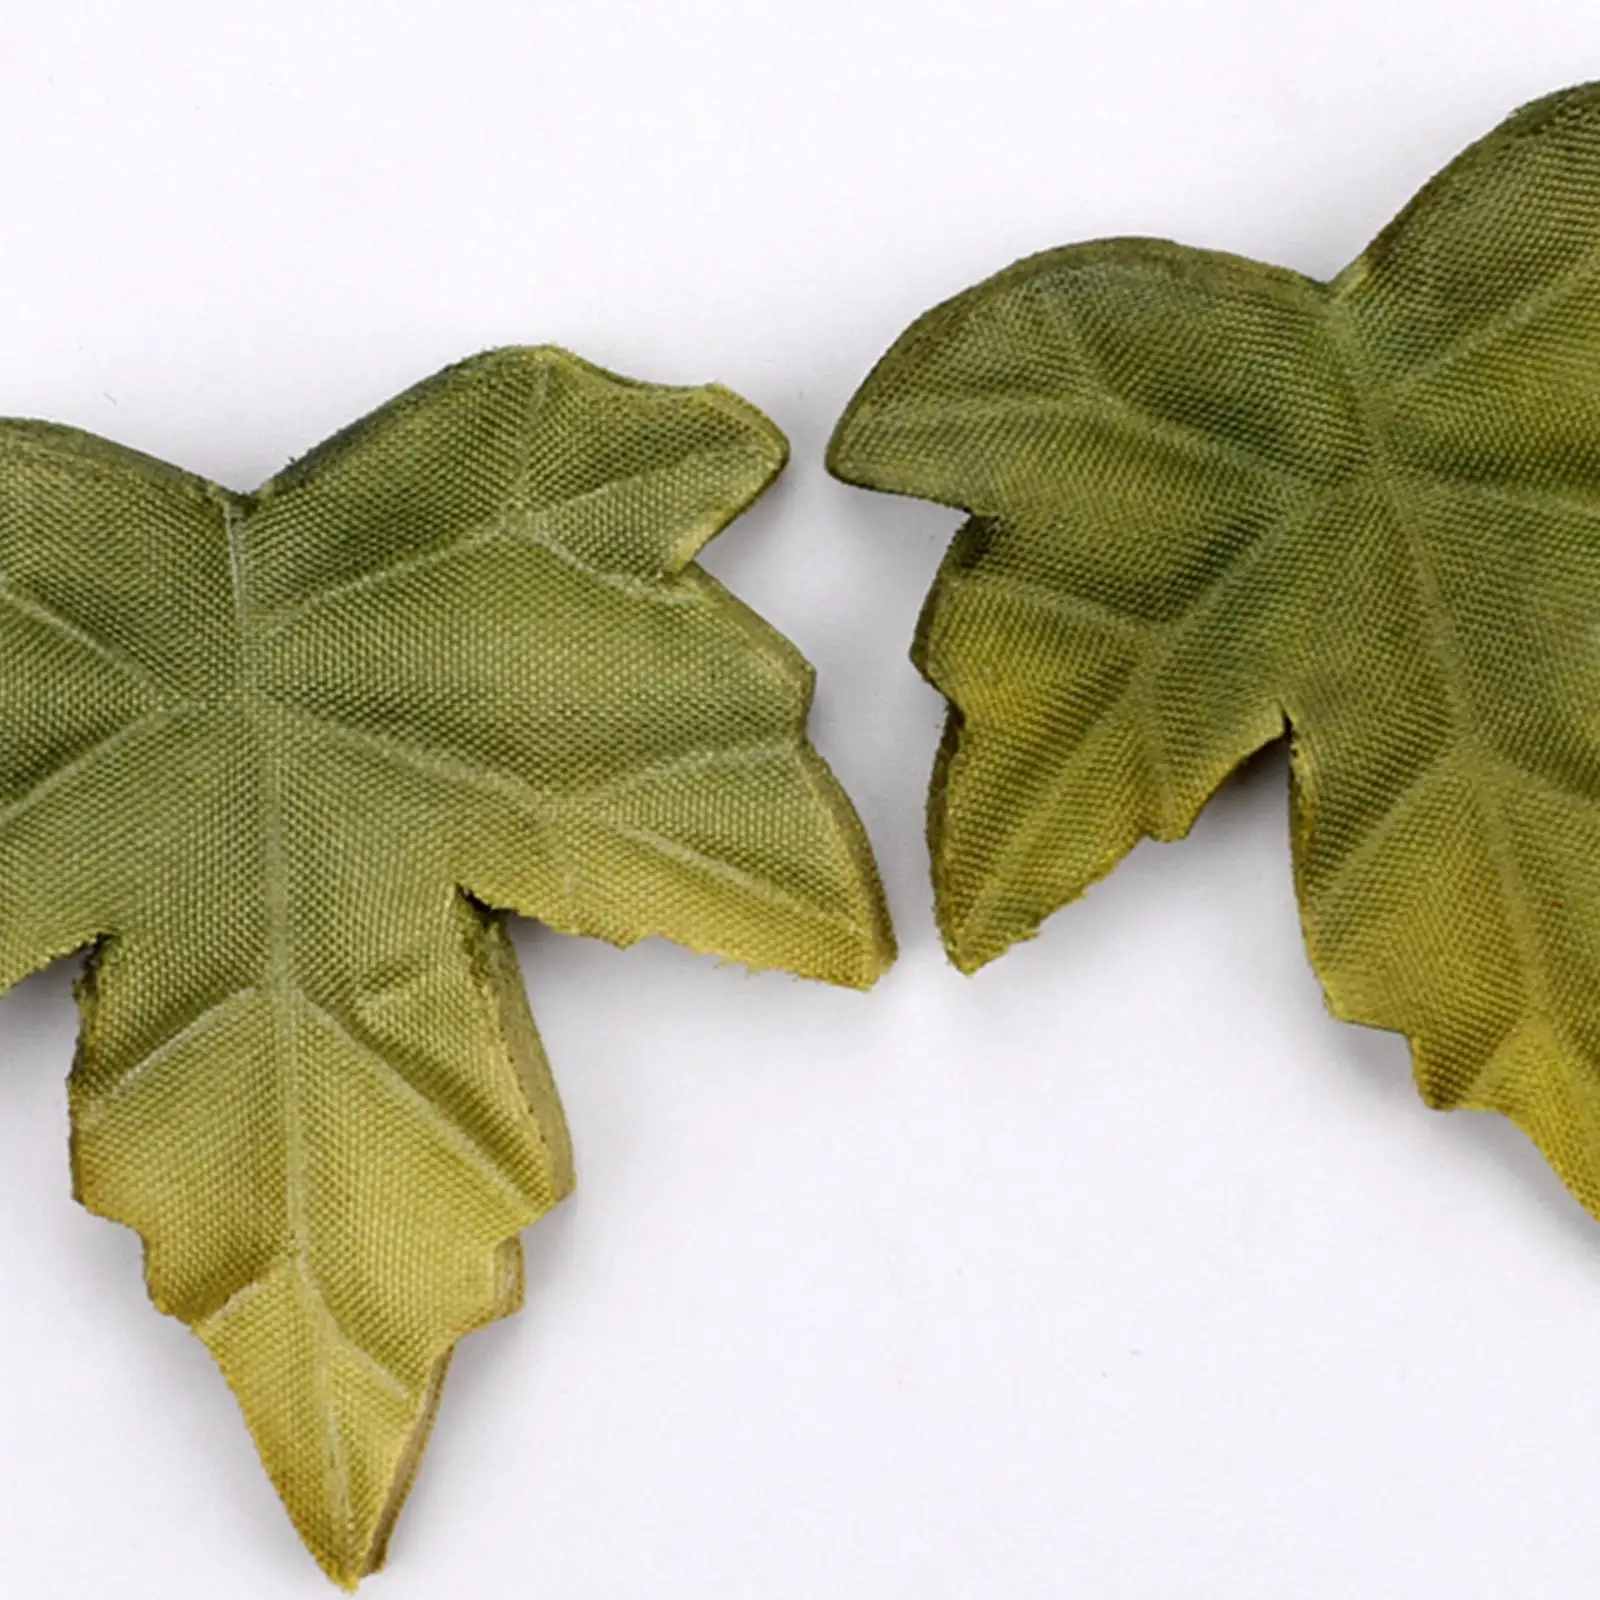 200x Artificial Maple Leaves Romantic Scatter Maple Leaves for Scrapbooking Valentine Day Table Centerpieces Floral Bouquet Home